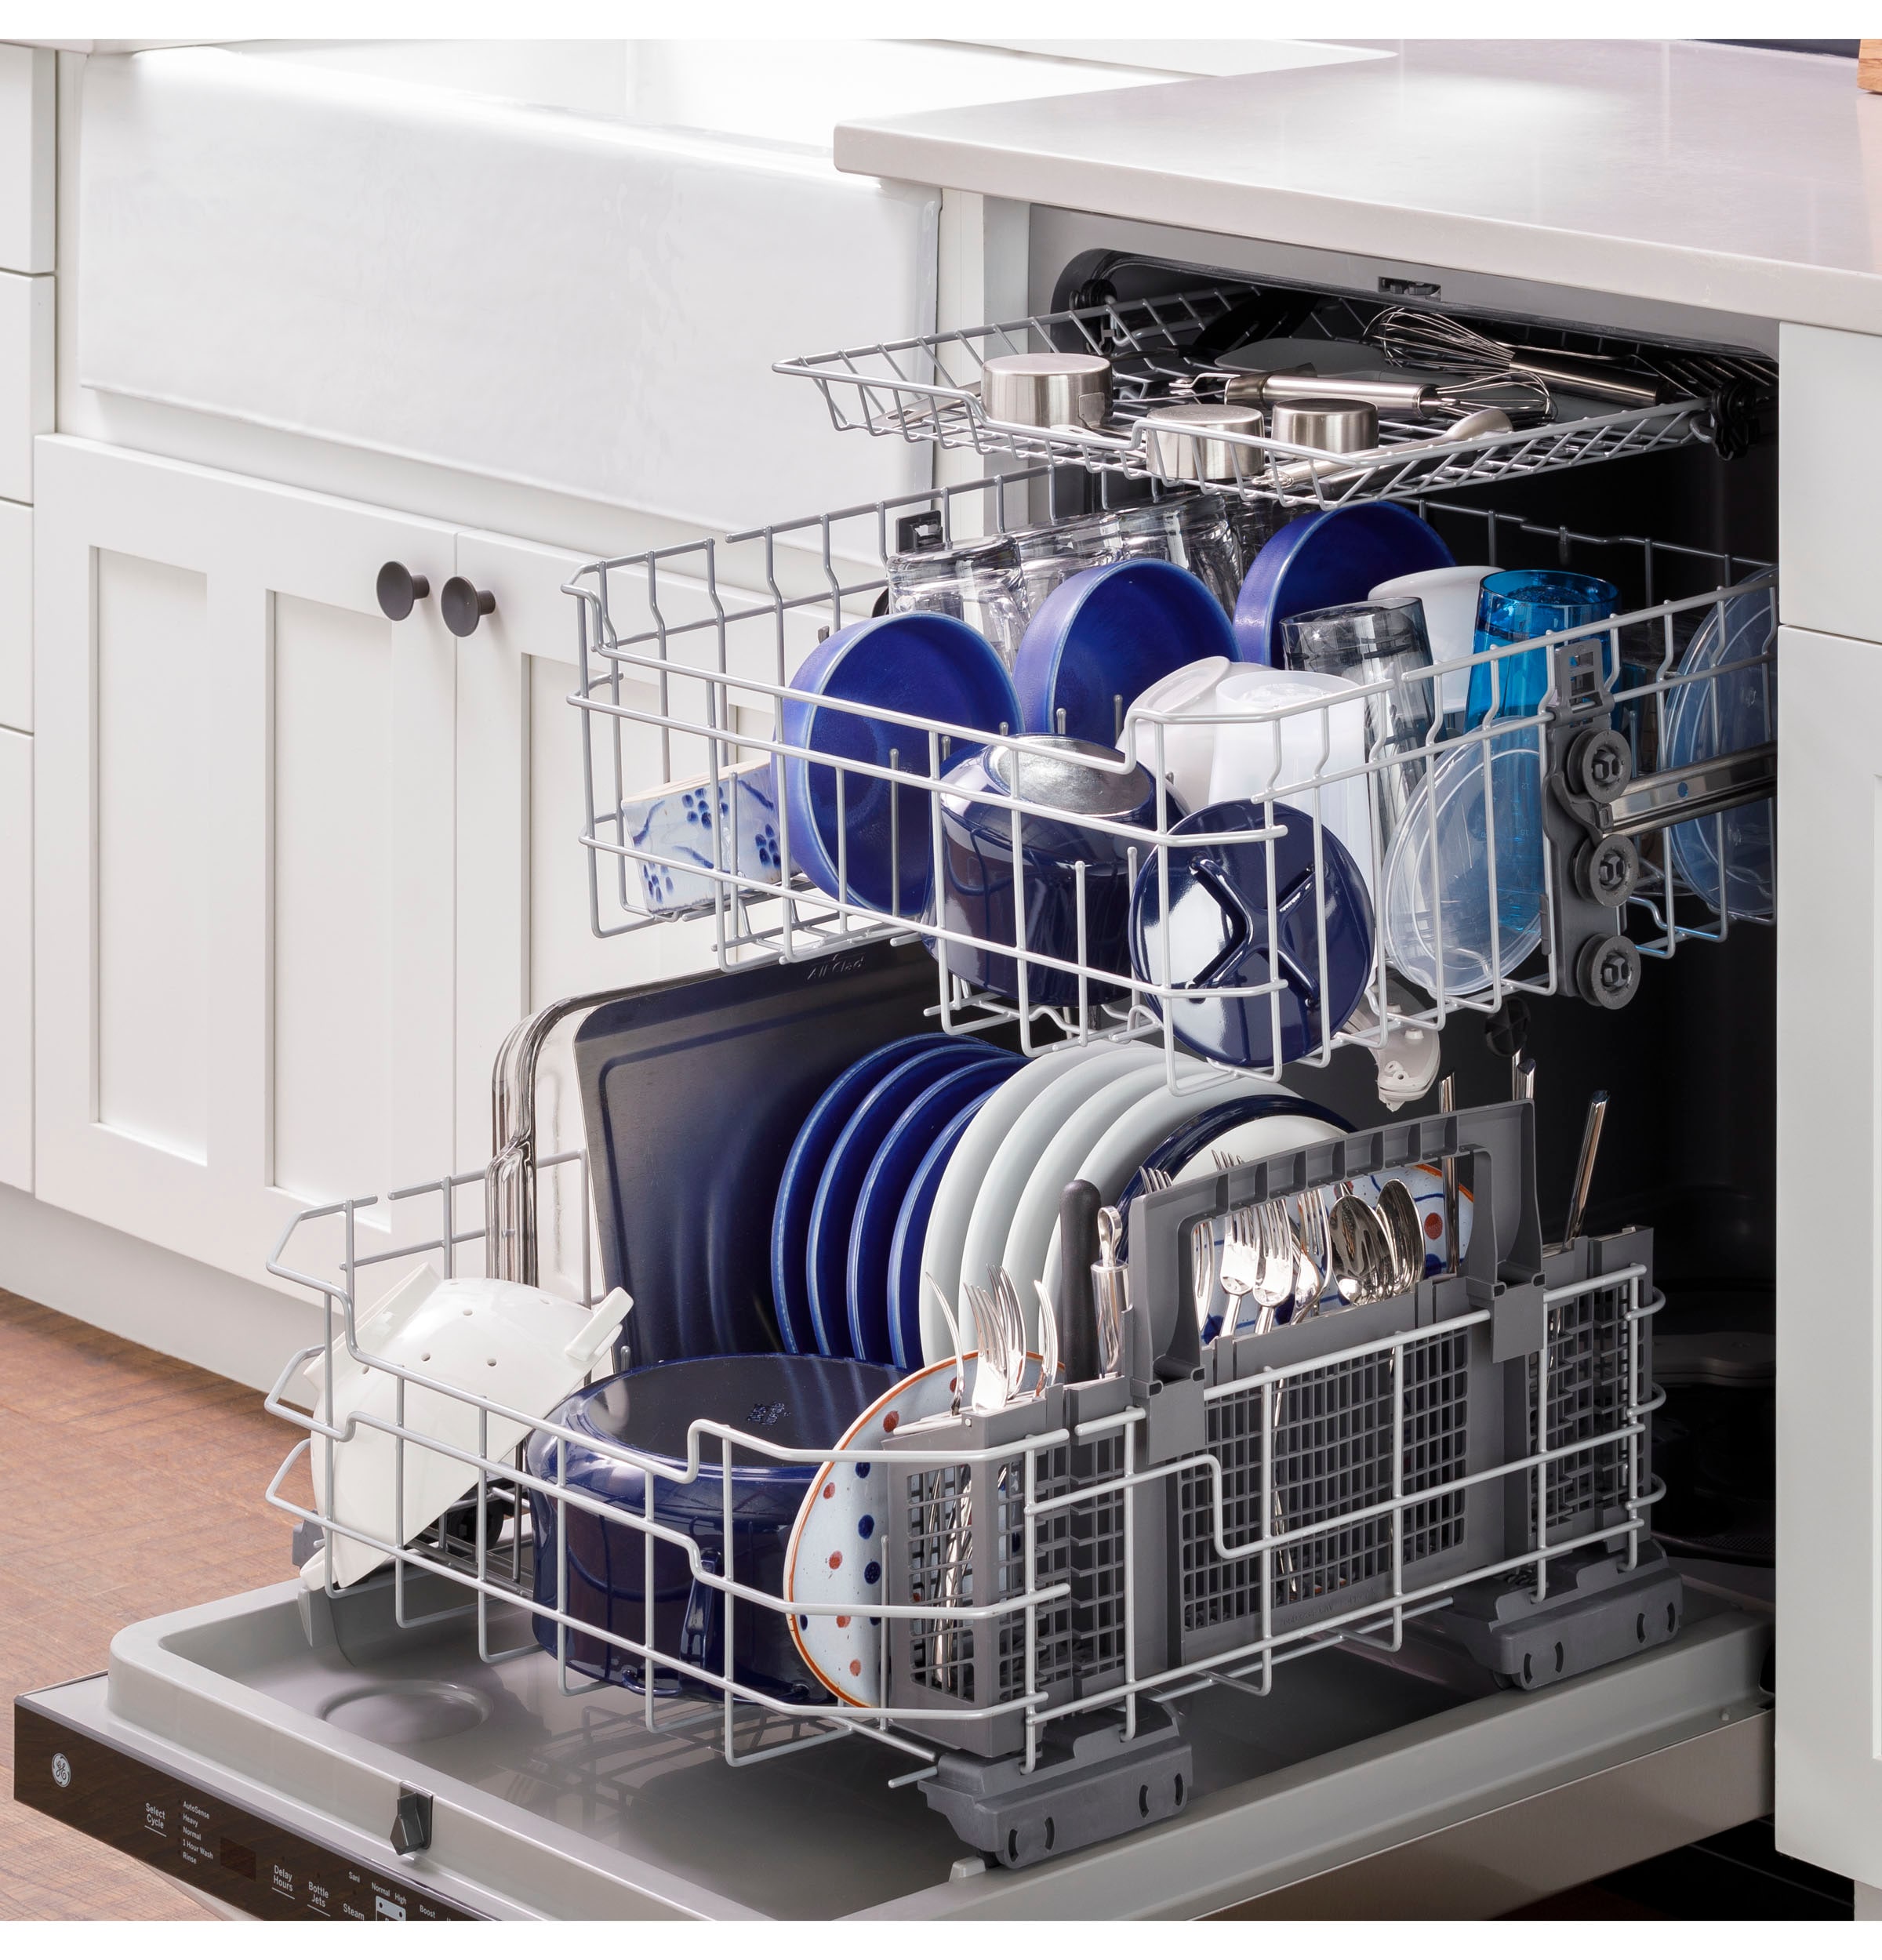 GE Dry Boost Top Control 24-in Built-In Dishwasher With Third Rack